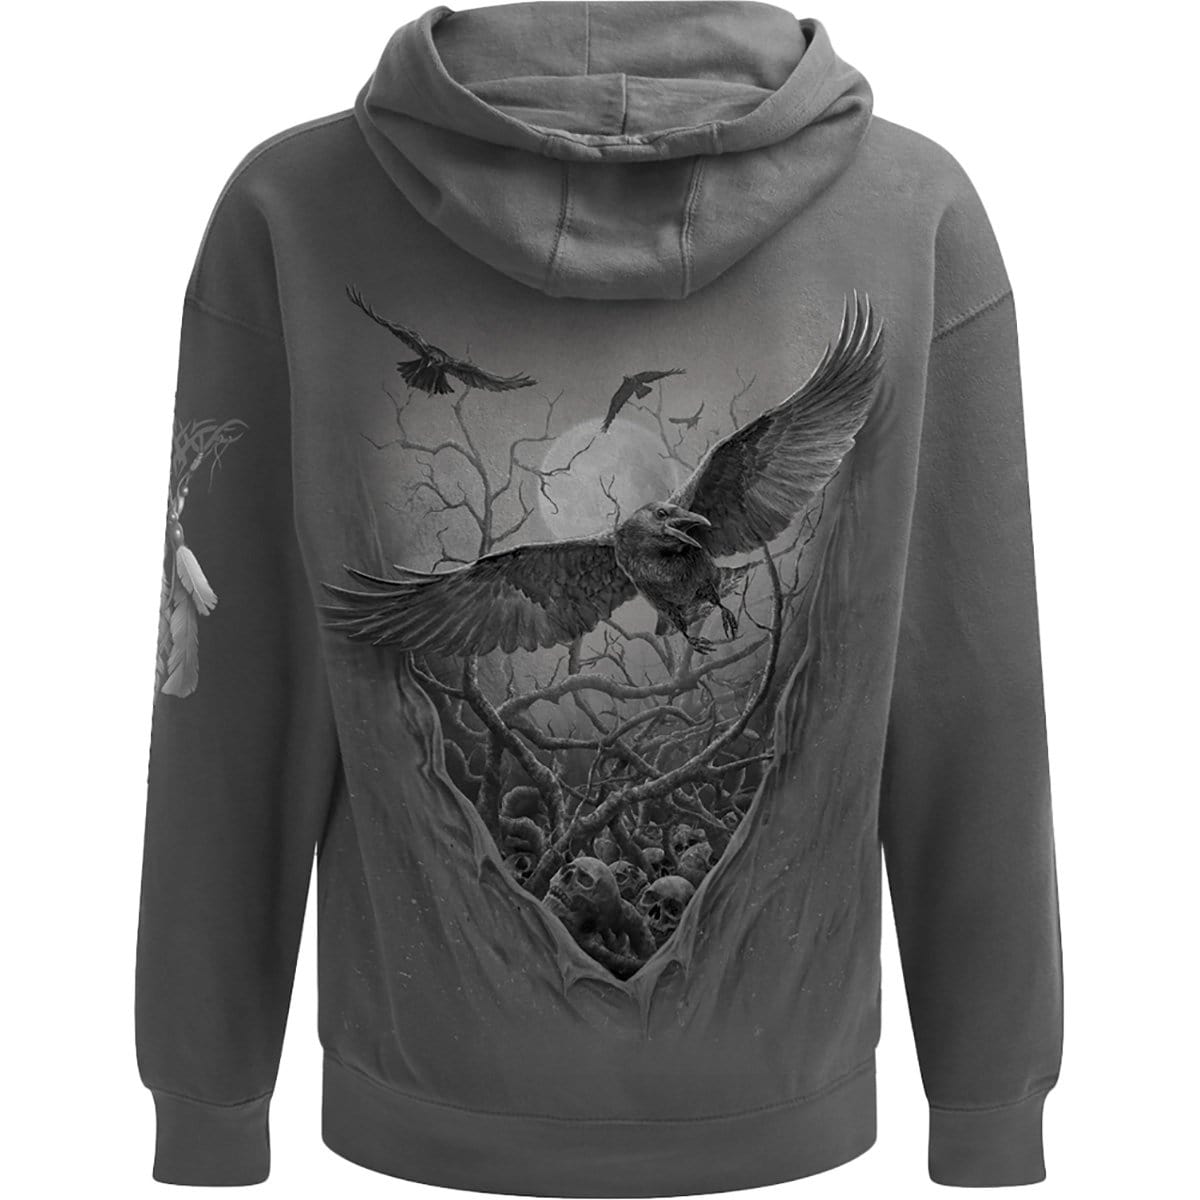 ROOTS OF HELL - Hoody Charcoal - Spiral USA